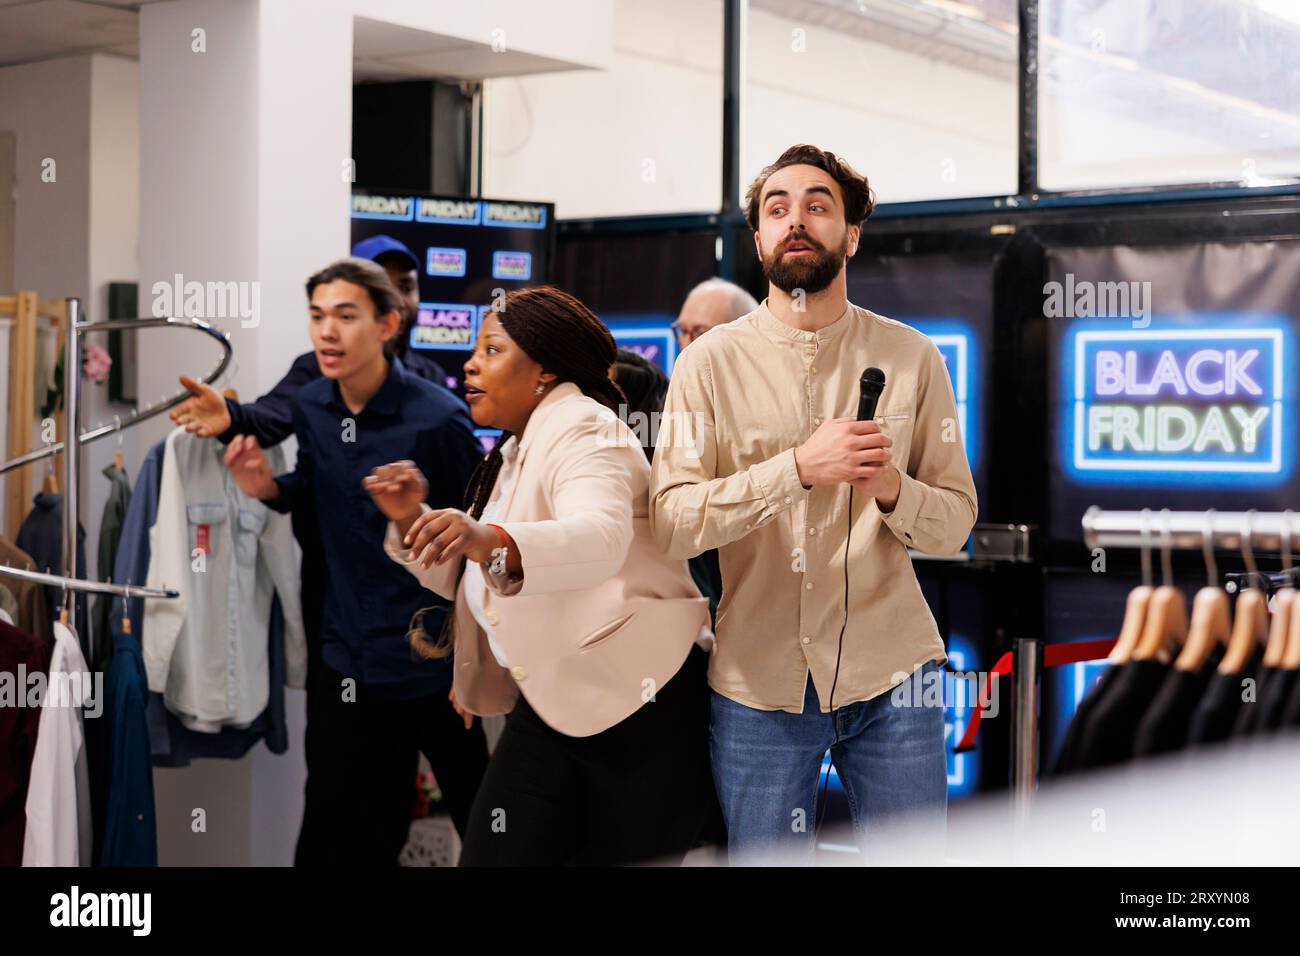 Shocked man video TV news reporter live broadcasting about Black Friday shopping madness, standing with microphone in crowded store. Crazy frenzy crowd running to get best deals into clothes shop Stock Photo